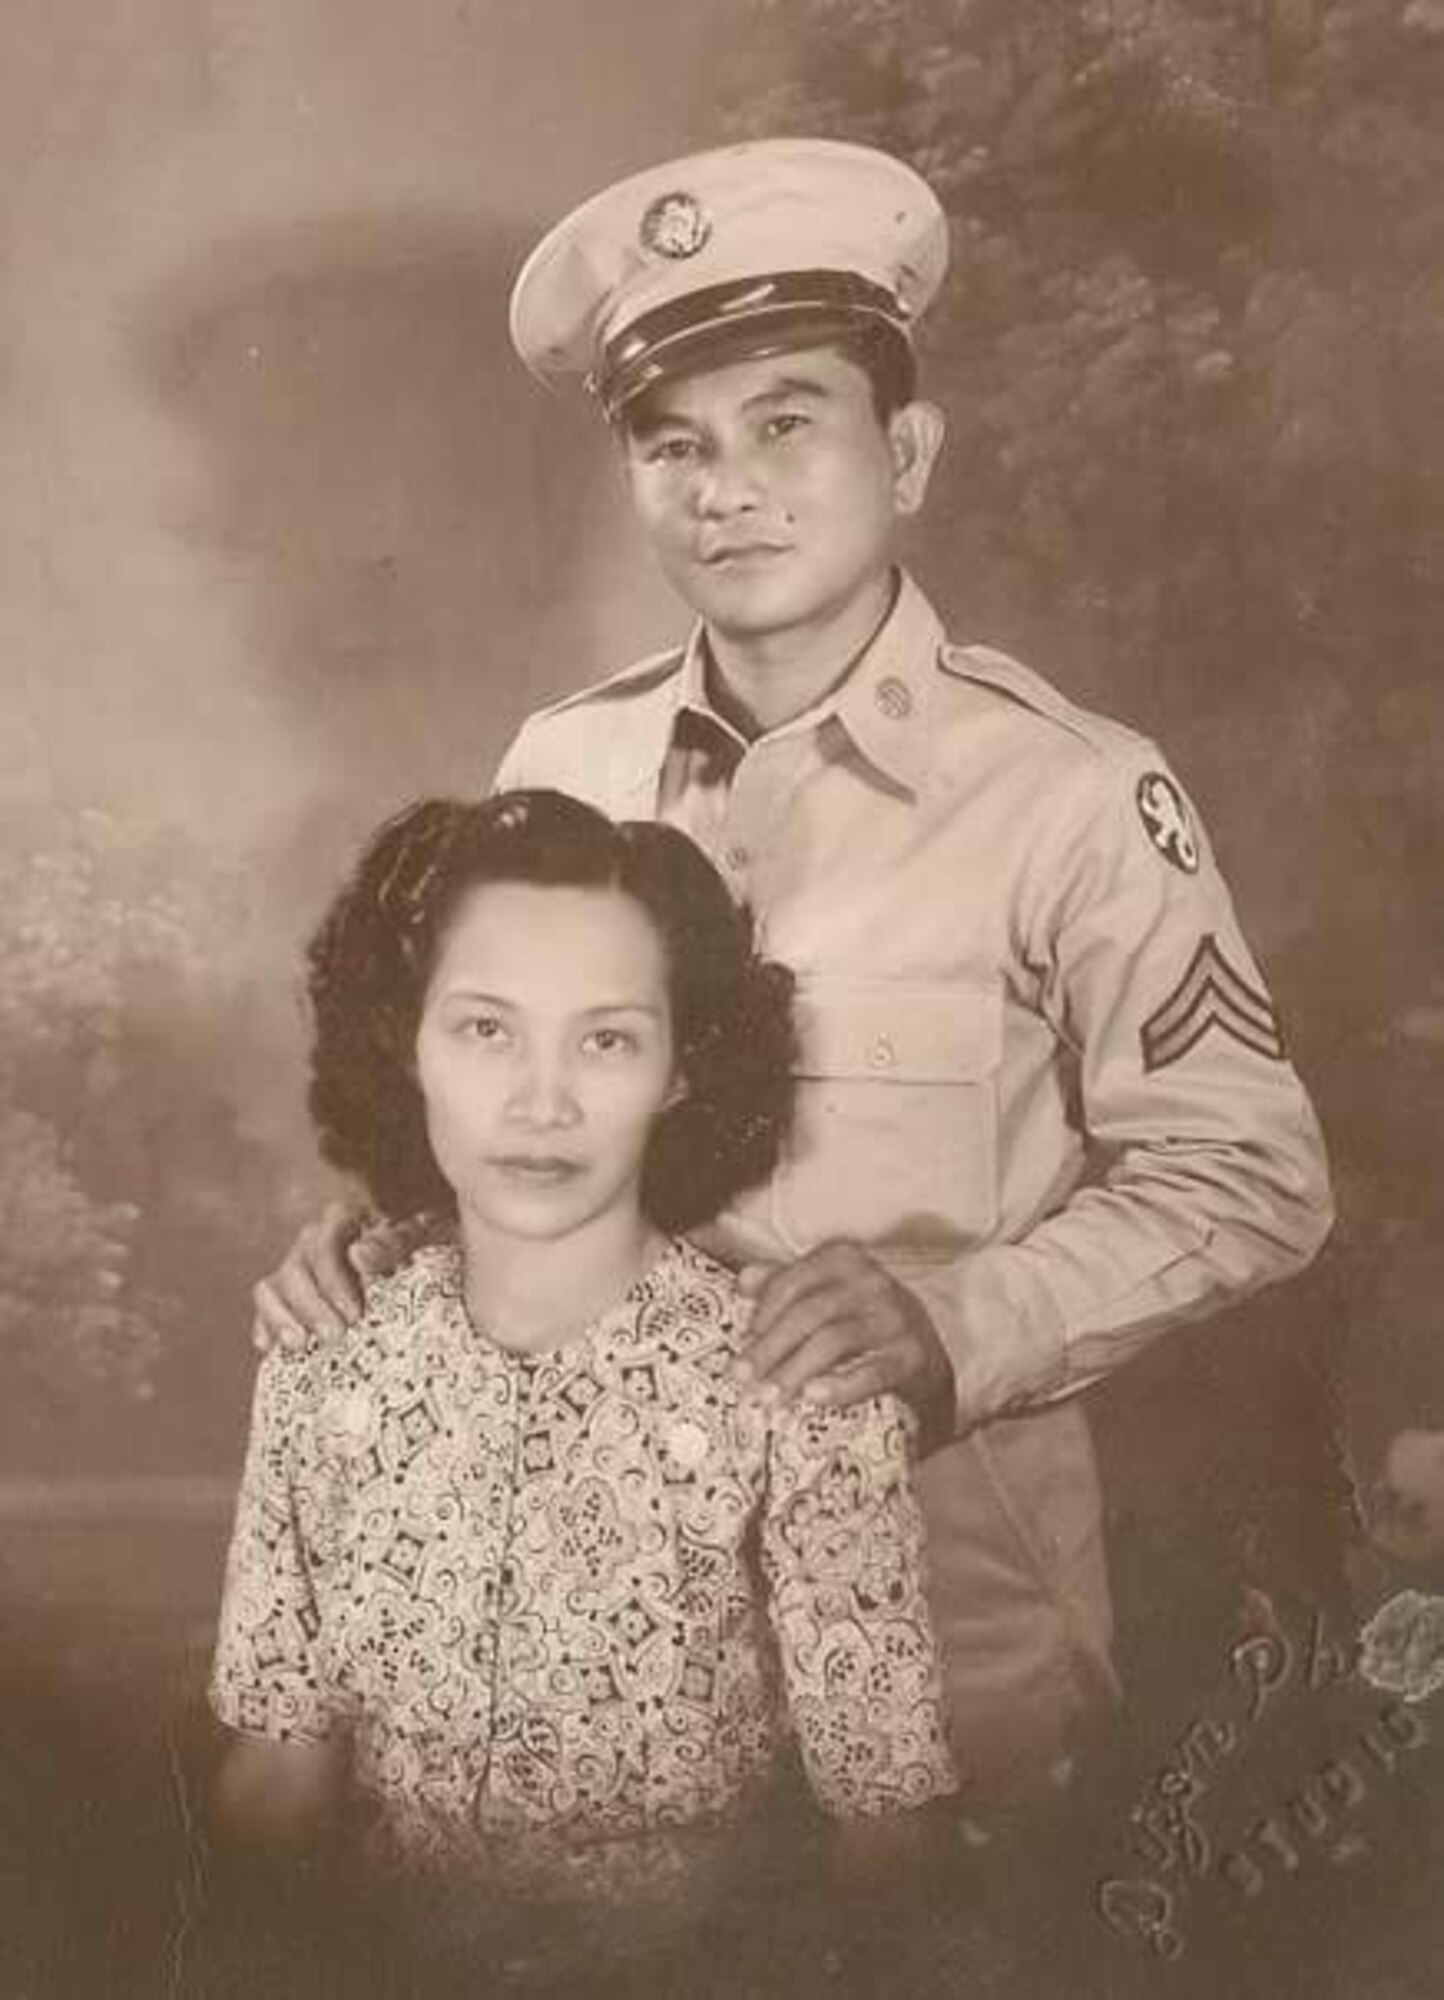 Ben and Cippy Parcasio pose for a photo in 1940, in the Philippines. (U.S. Air Force courtesy photo)